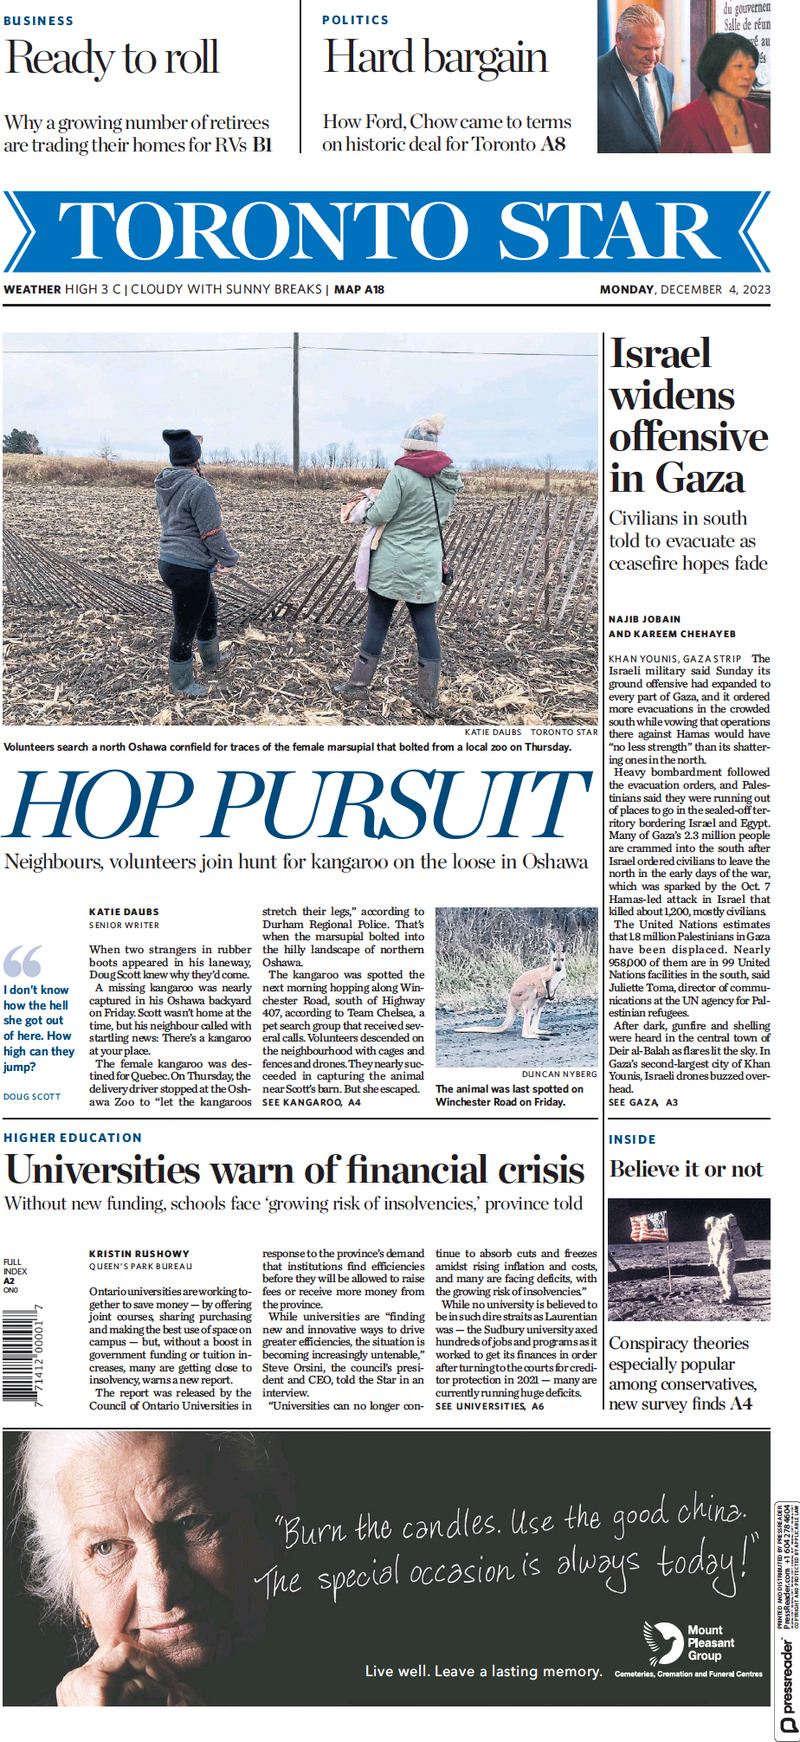 Toronto Star - Front Page - 04/12/2023